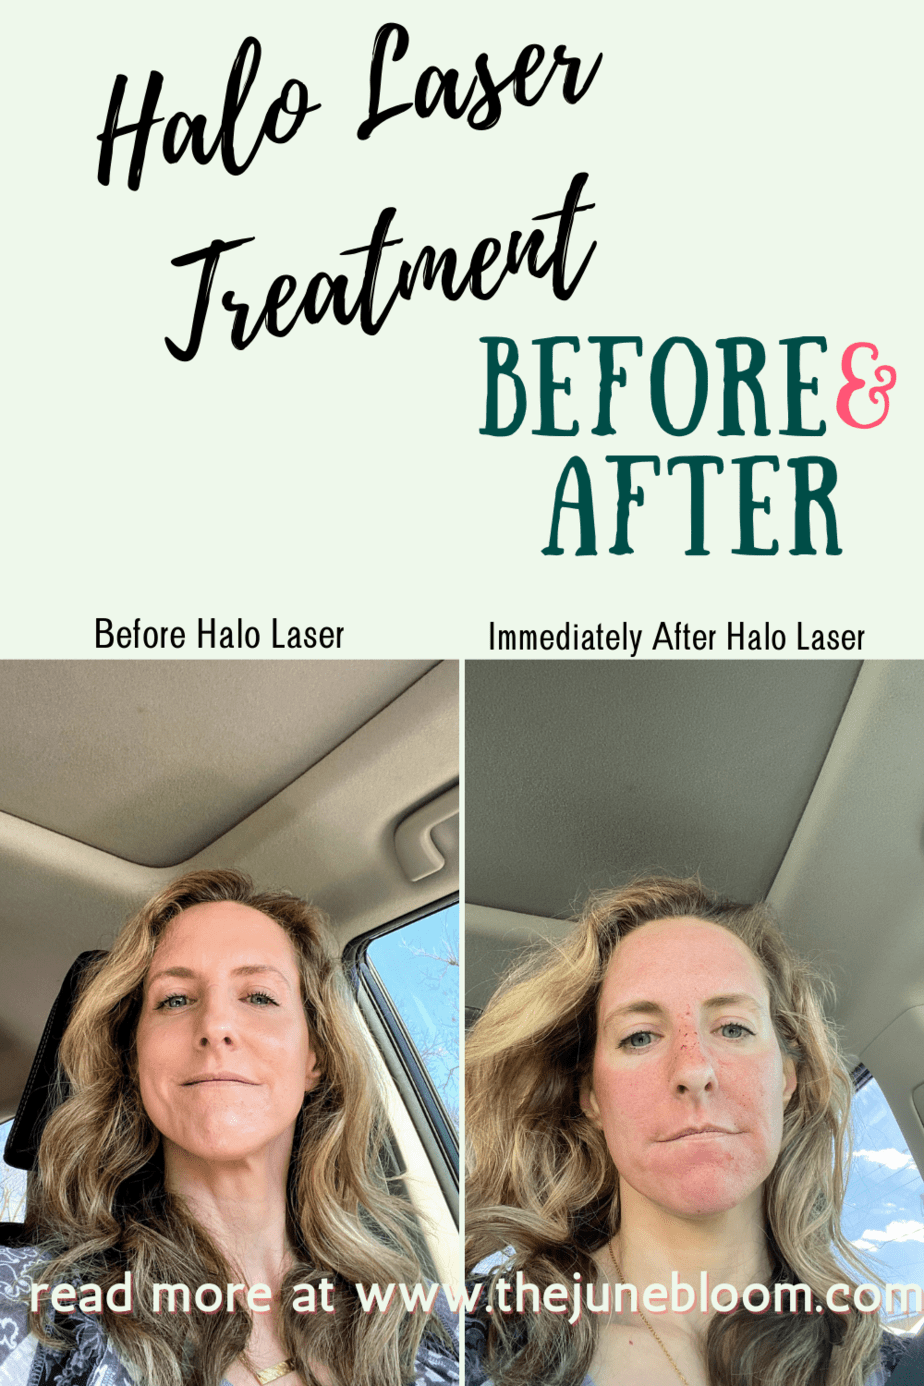 Does halo laser treatment really work